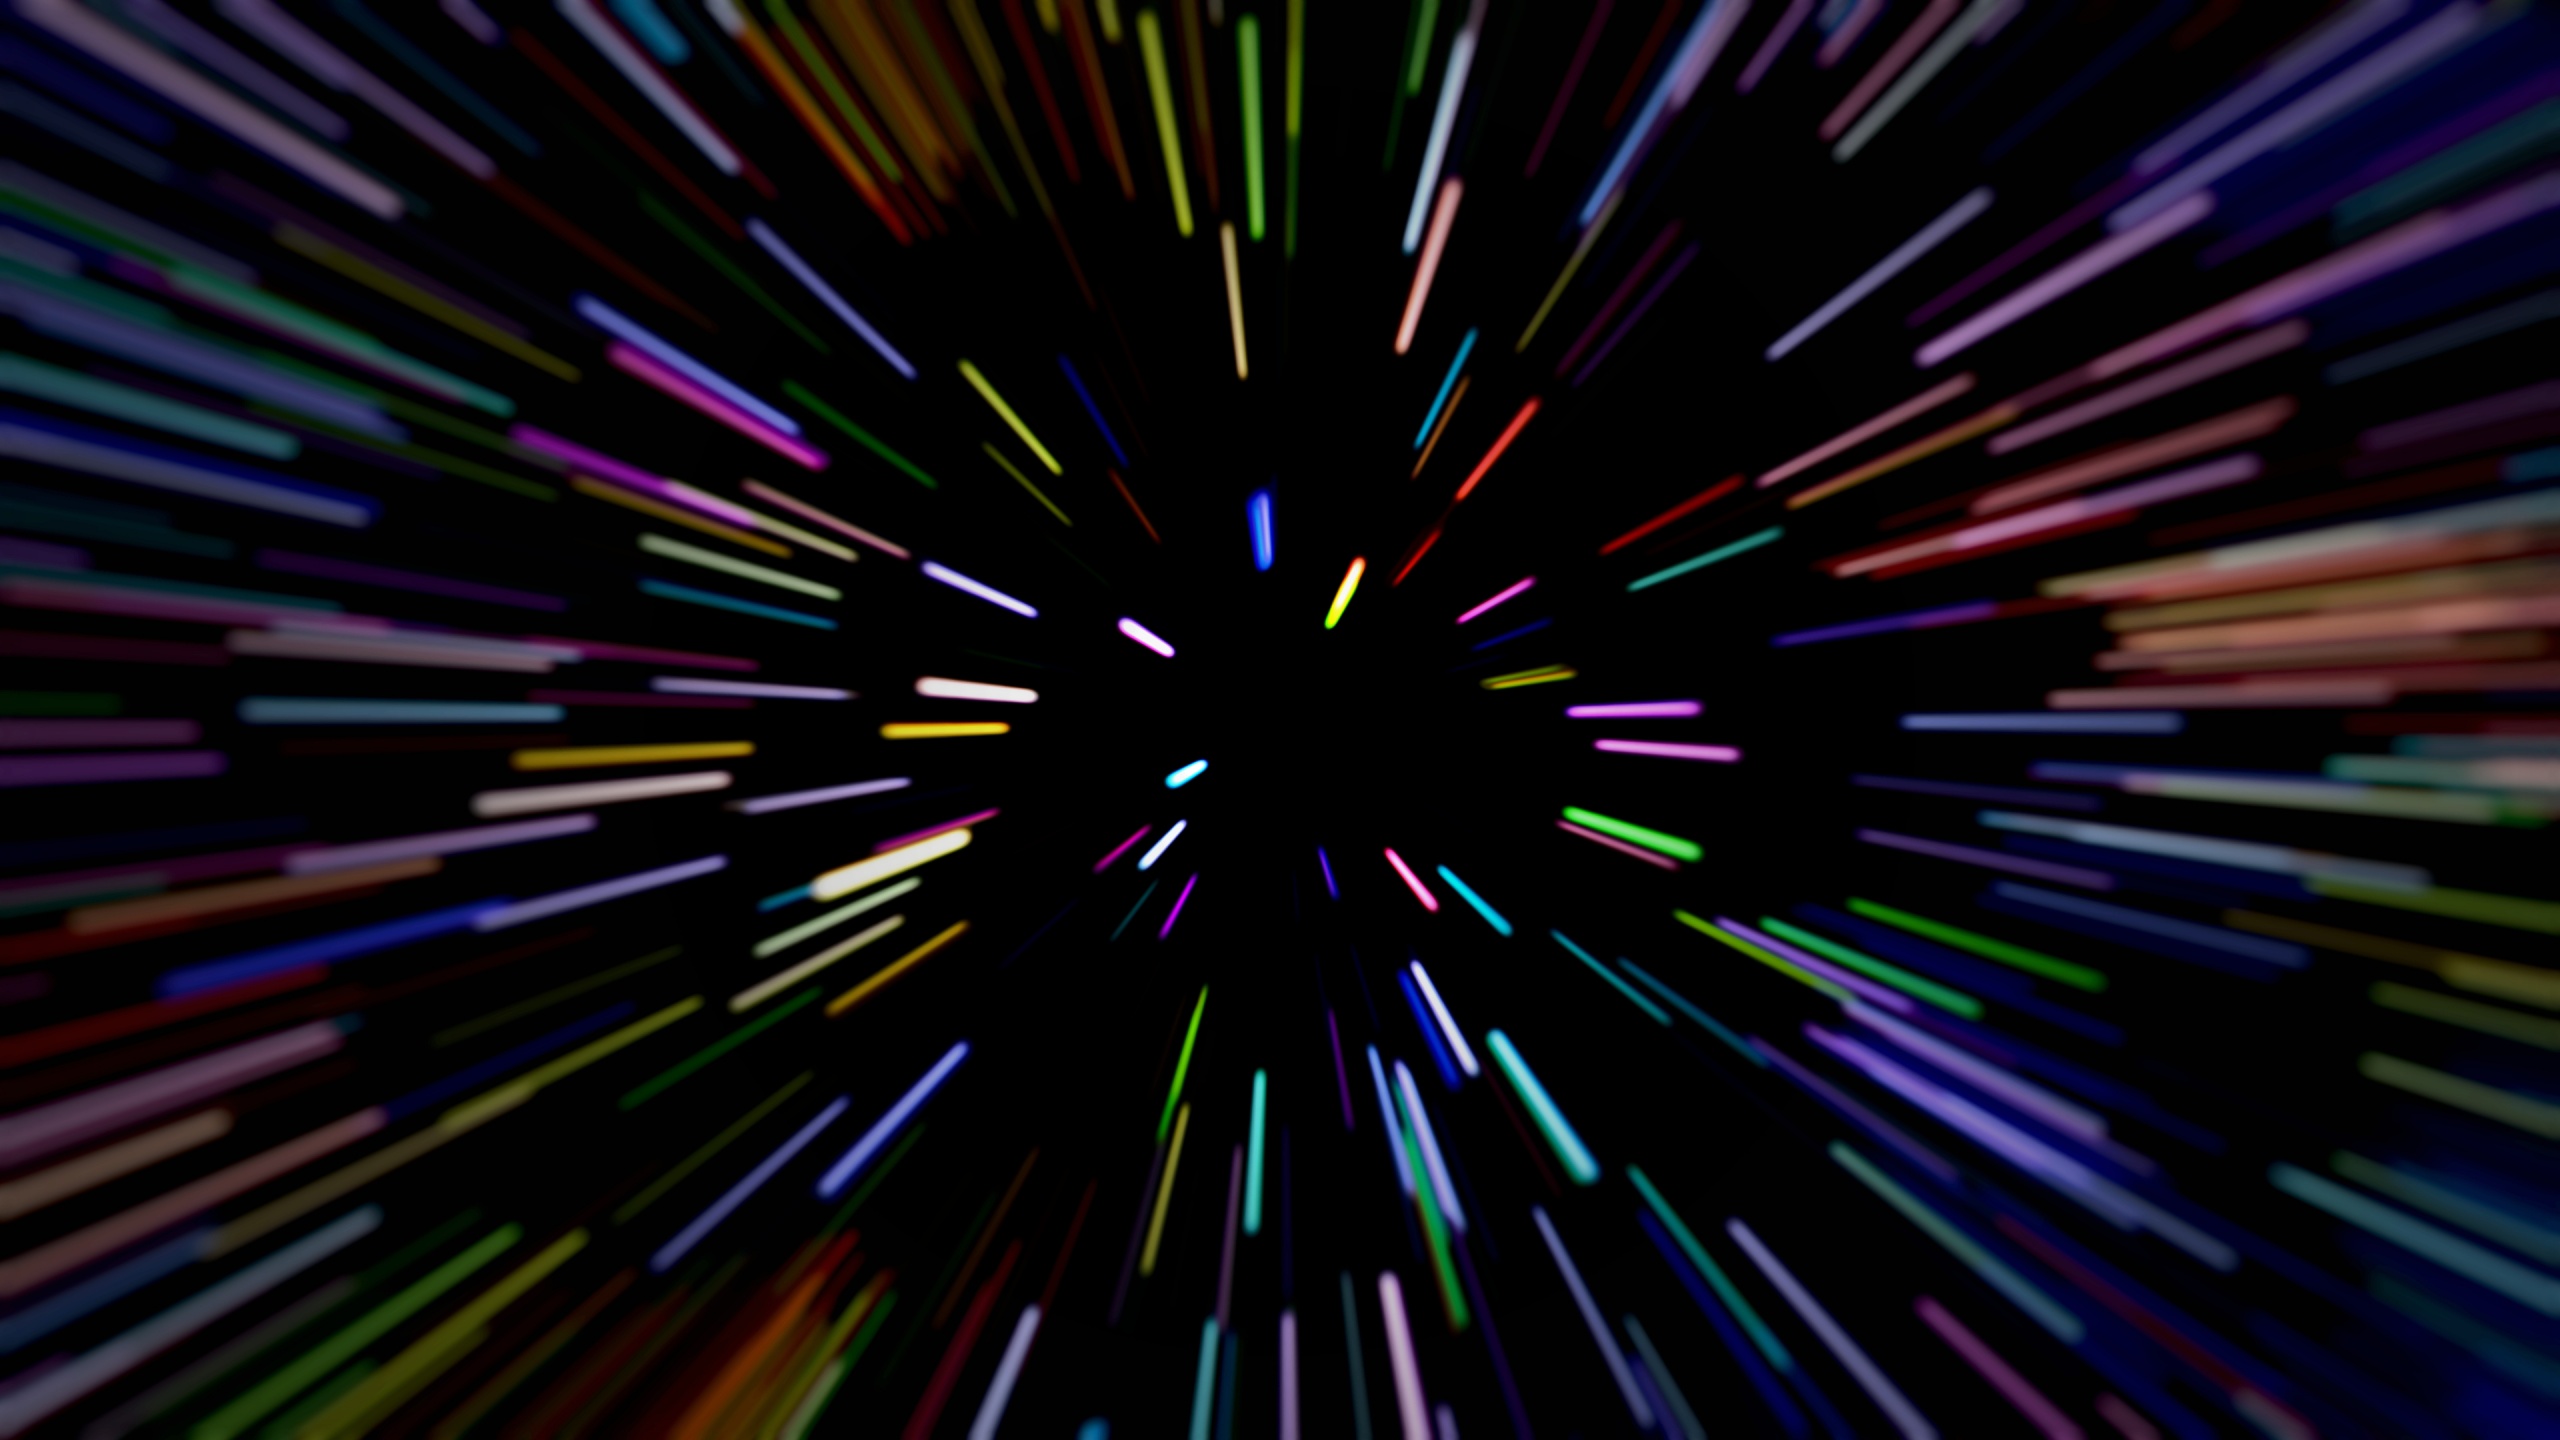 Light Speed Wallpaper 4K, Space Warp, Colored rays, Big Bang, Colourful, Abstract